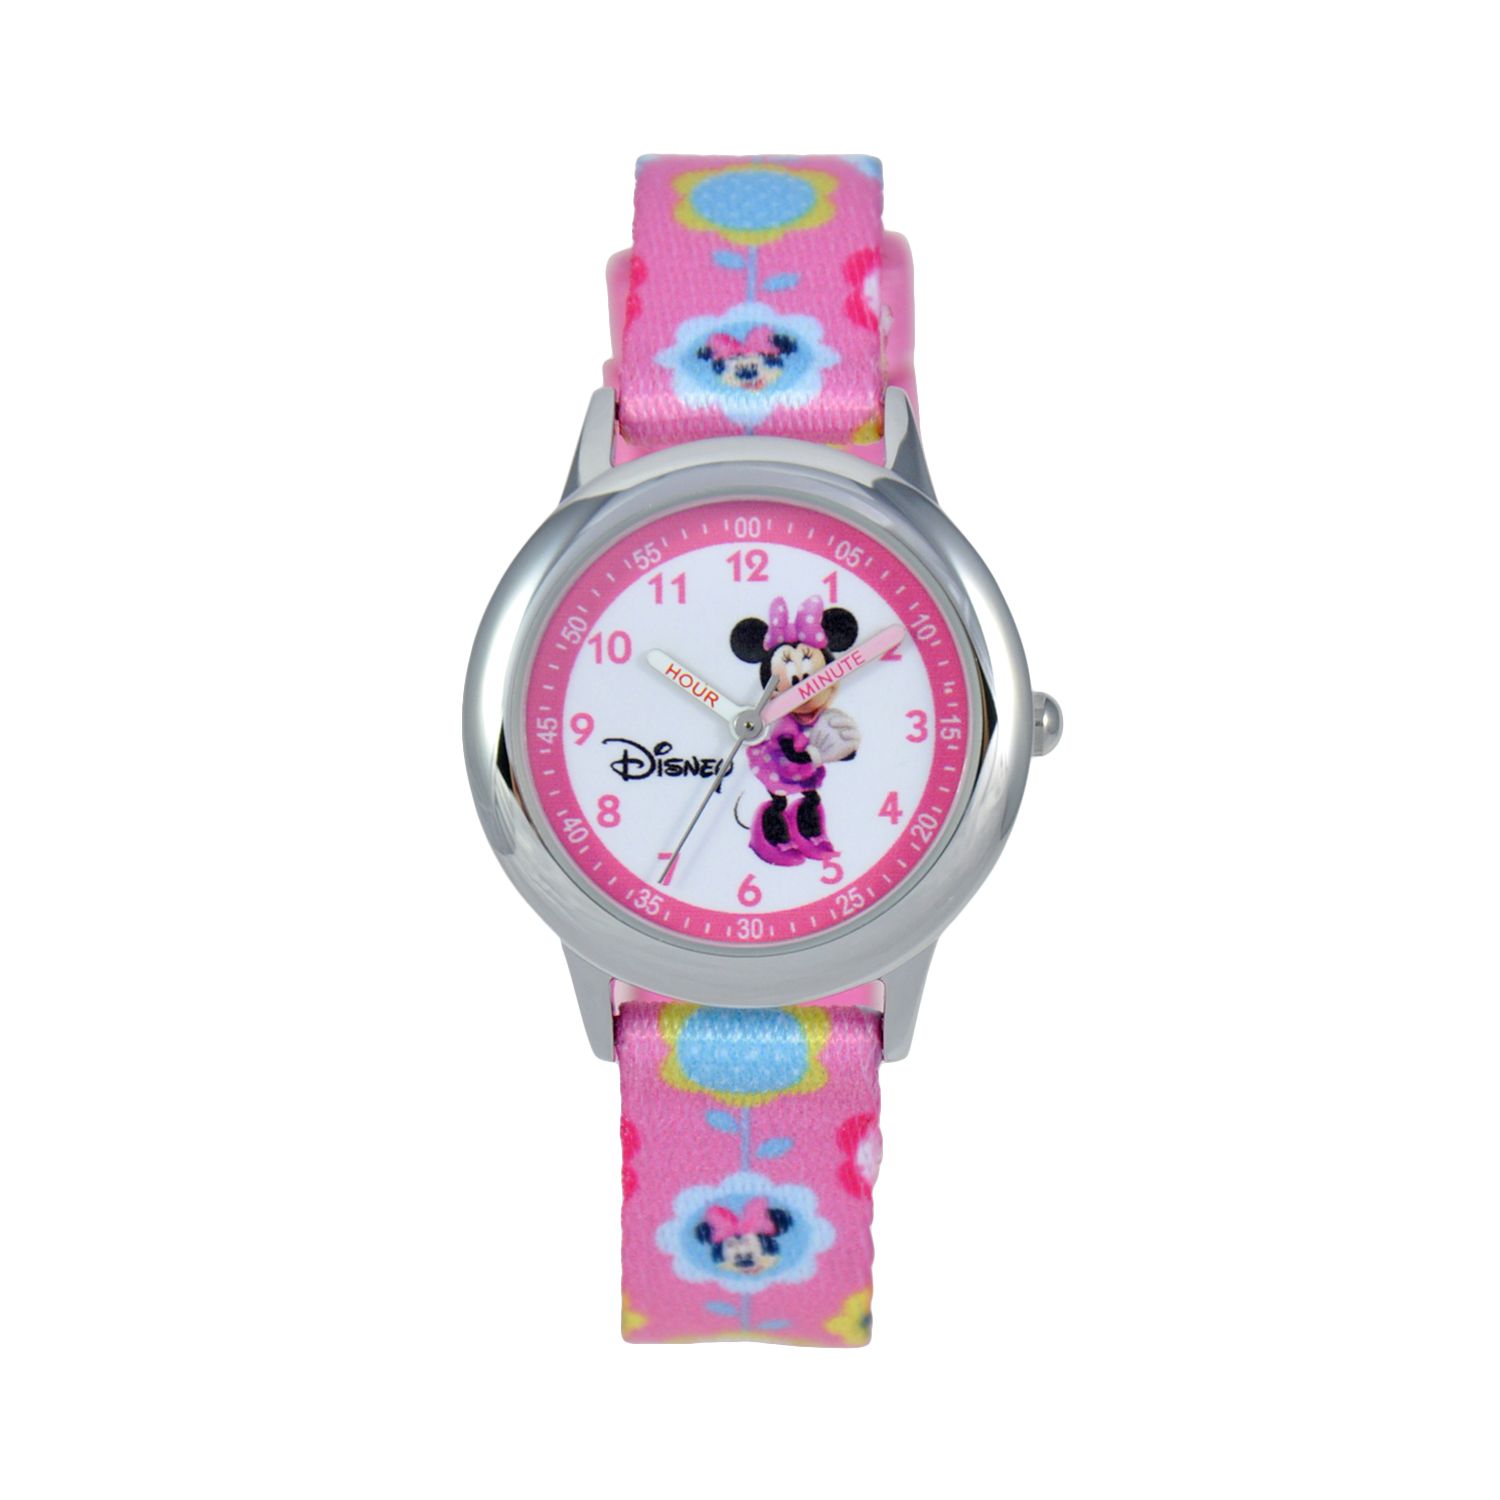 Image for Disney 's Minnie Mouse Kids' Floral Time Teacher Watch at Kohl's.